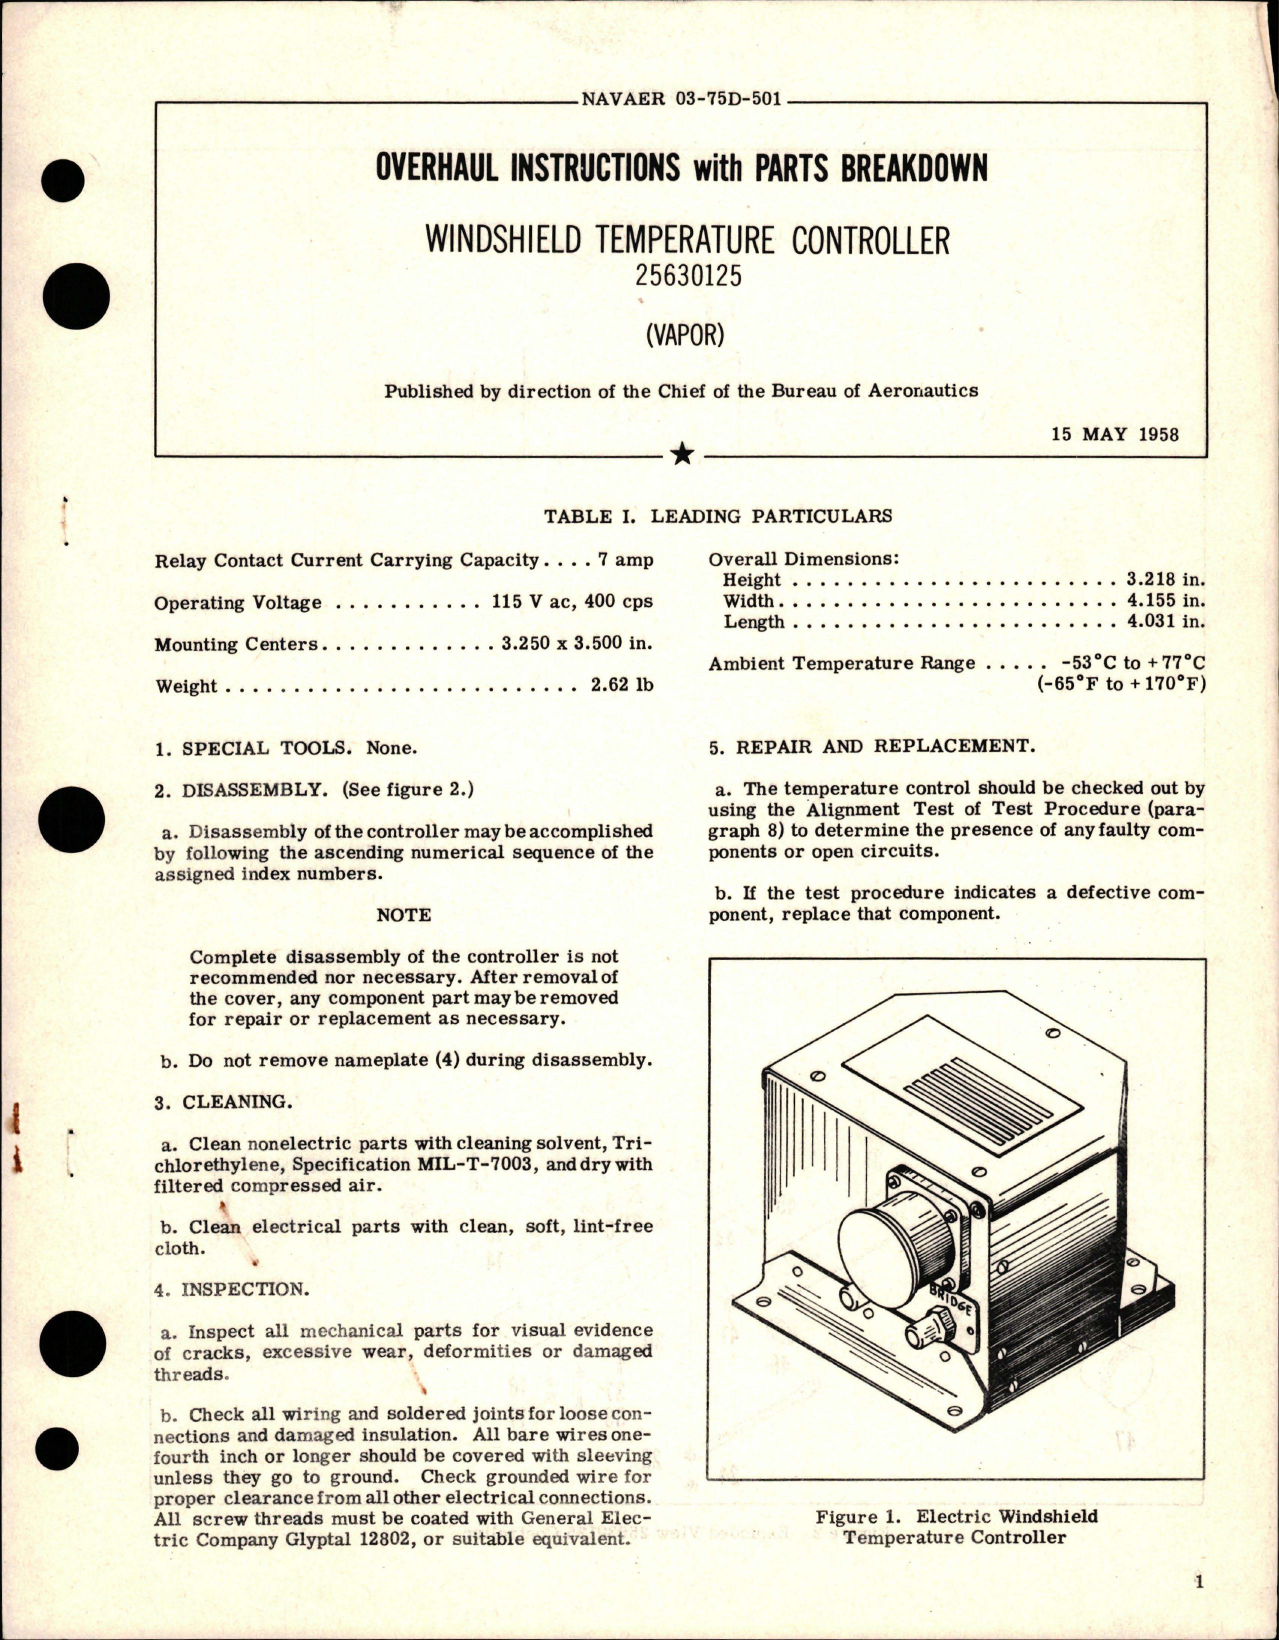 Sample page 1 from AirCorps Library document: Overhaul Instructions with Parts Breakdown for Windshield Temperature Controller - 25630125